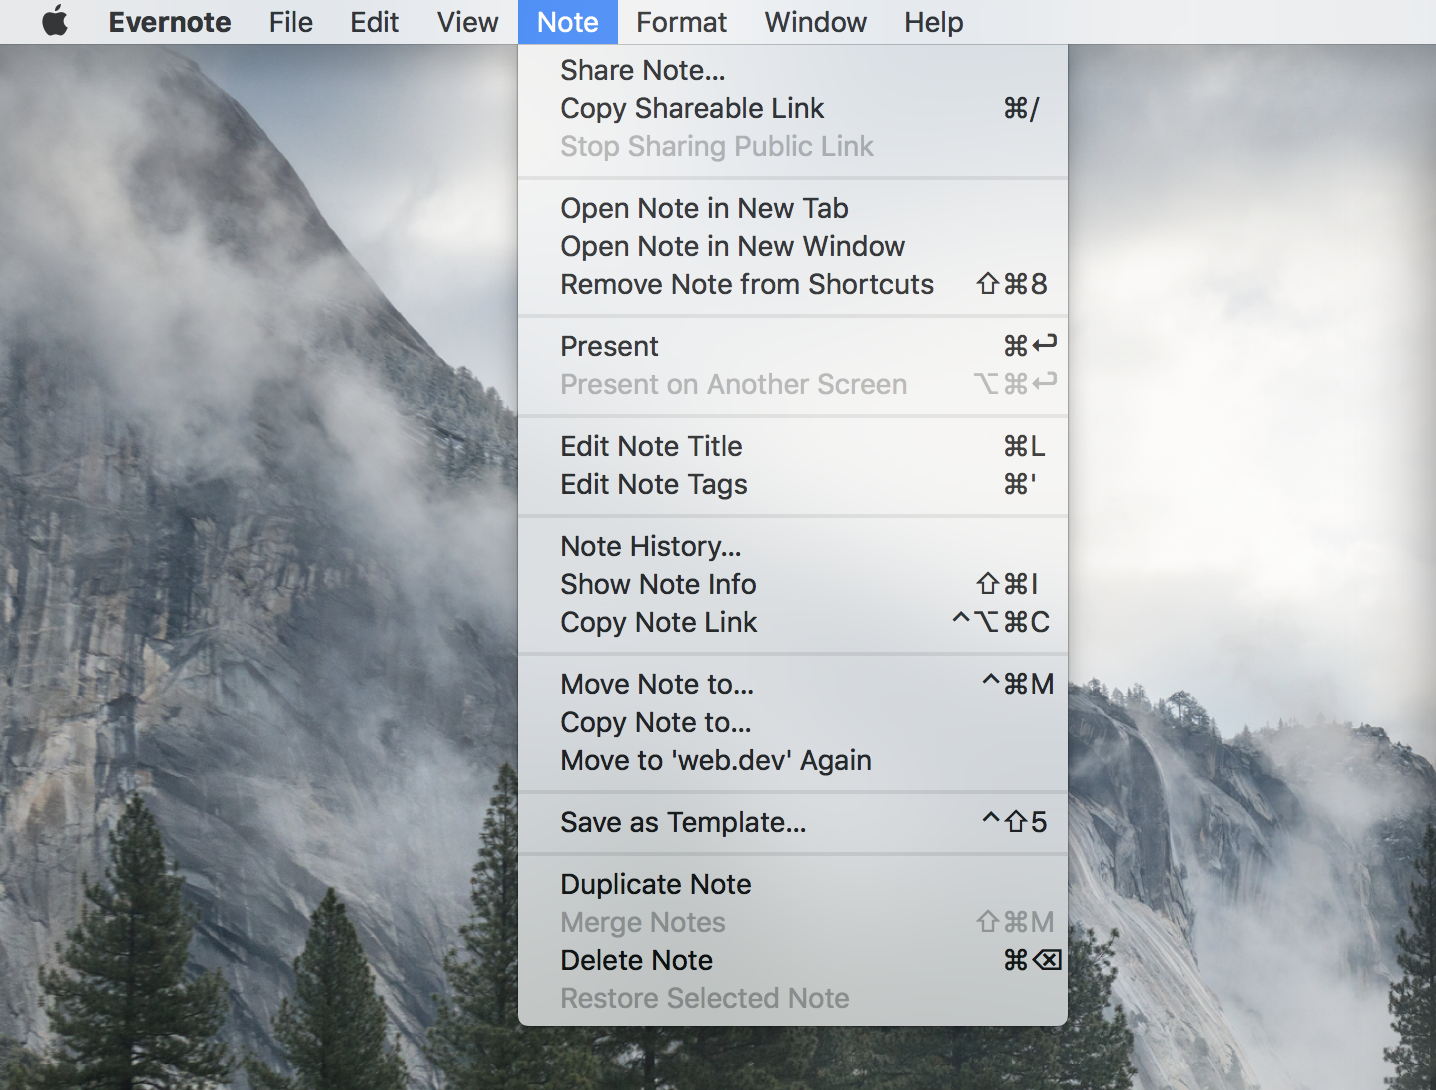 The menu bar for Evernote, showing the Note submenu